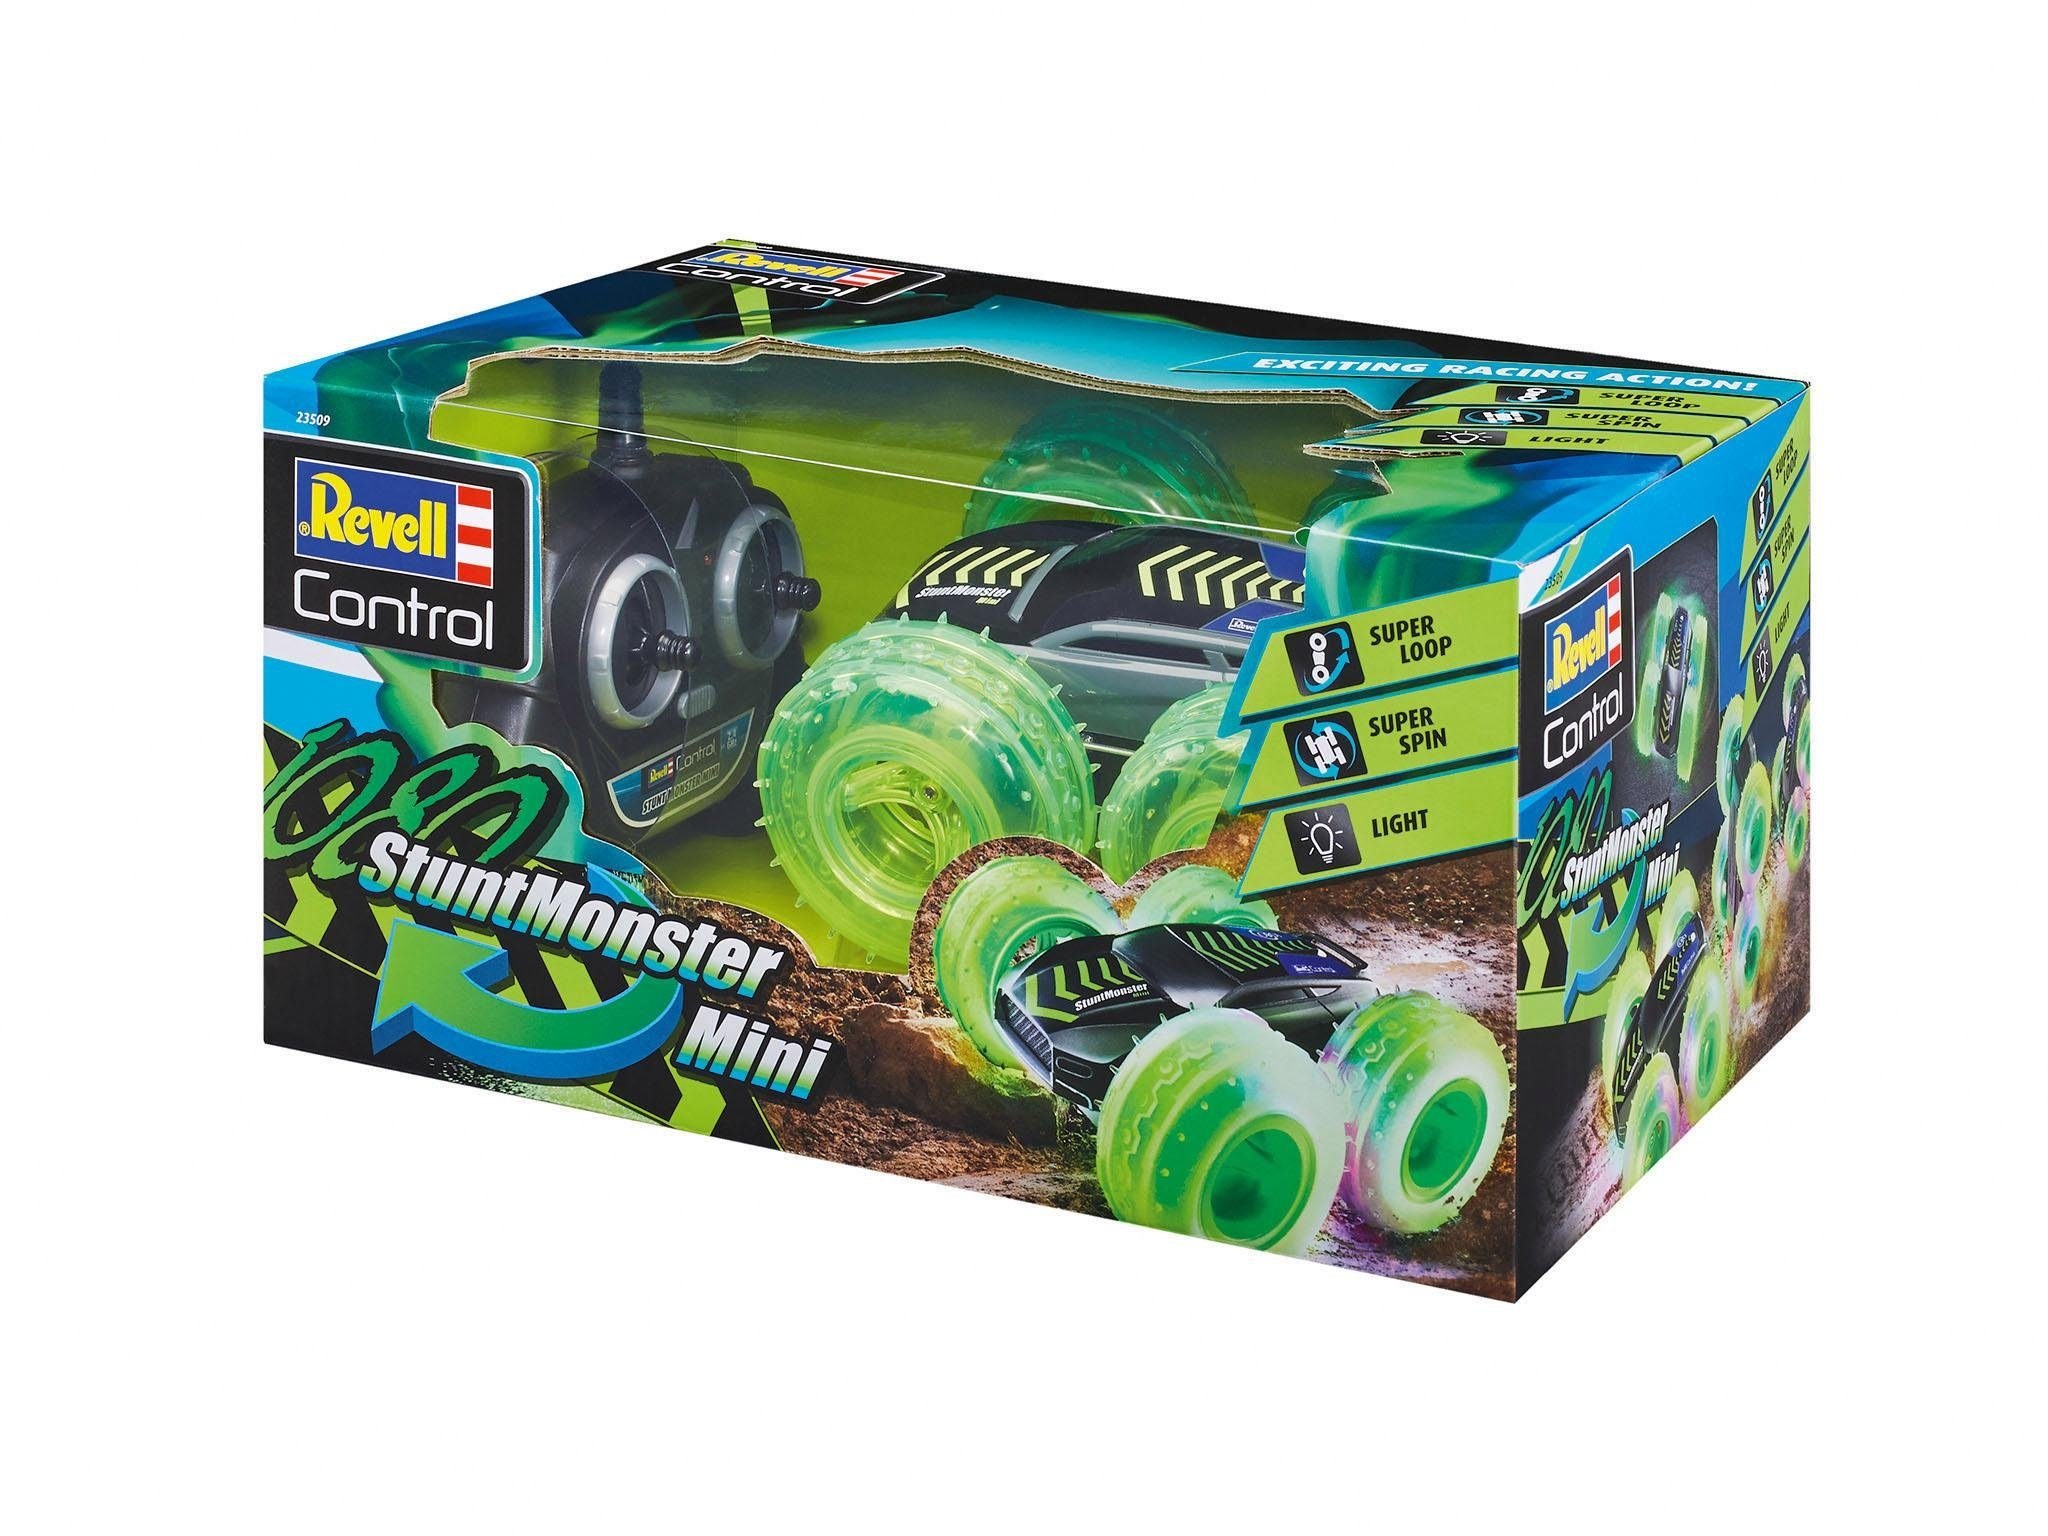 Revell® RC-Auto »Revell® control, Stunt Monster Mini«, mit LED-Beleuchtung